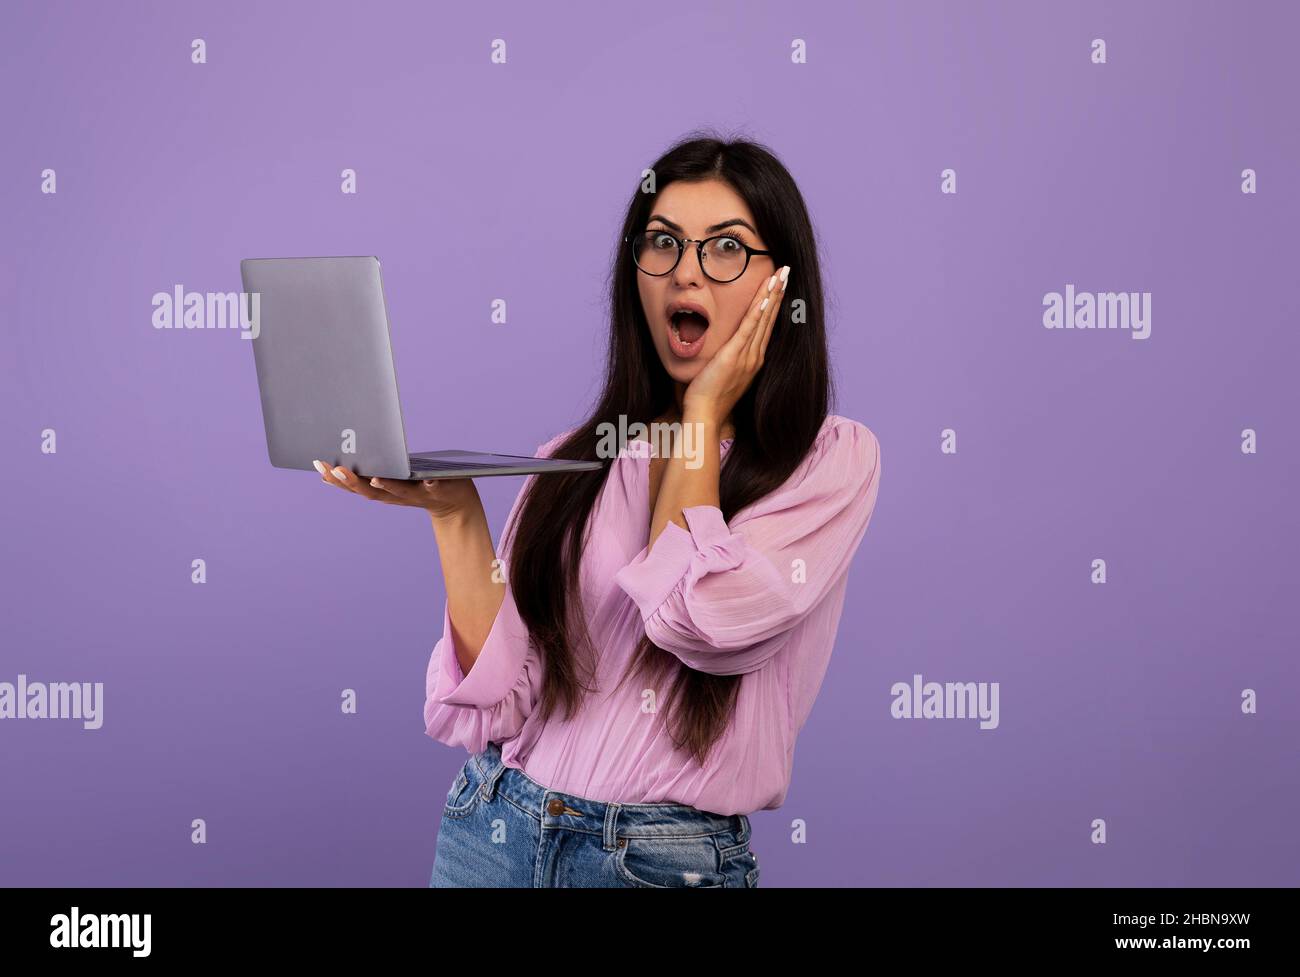 Shocked armenian woman holding laptop, having problems with computer, suffering bad internet connection Stock Photo